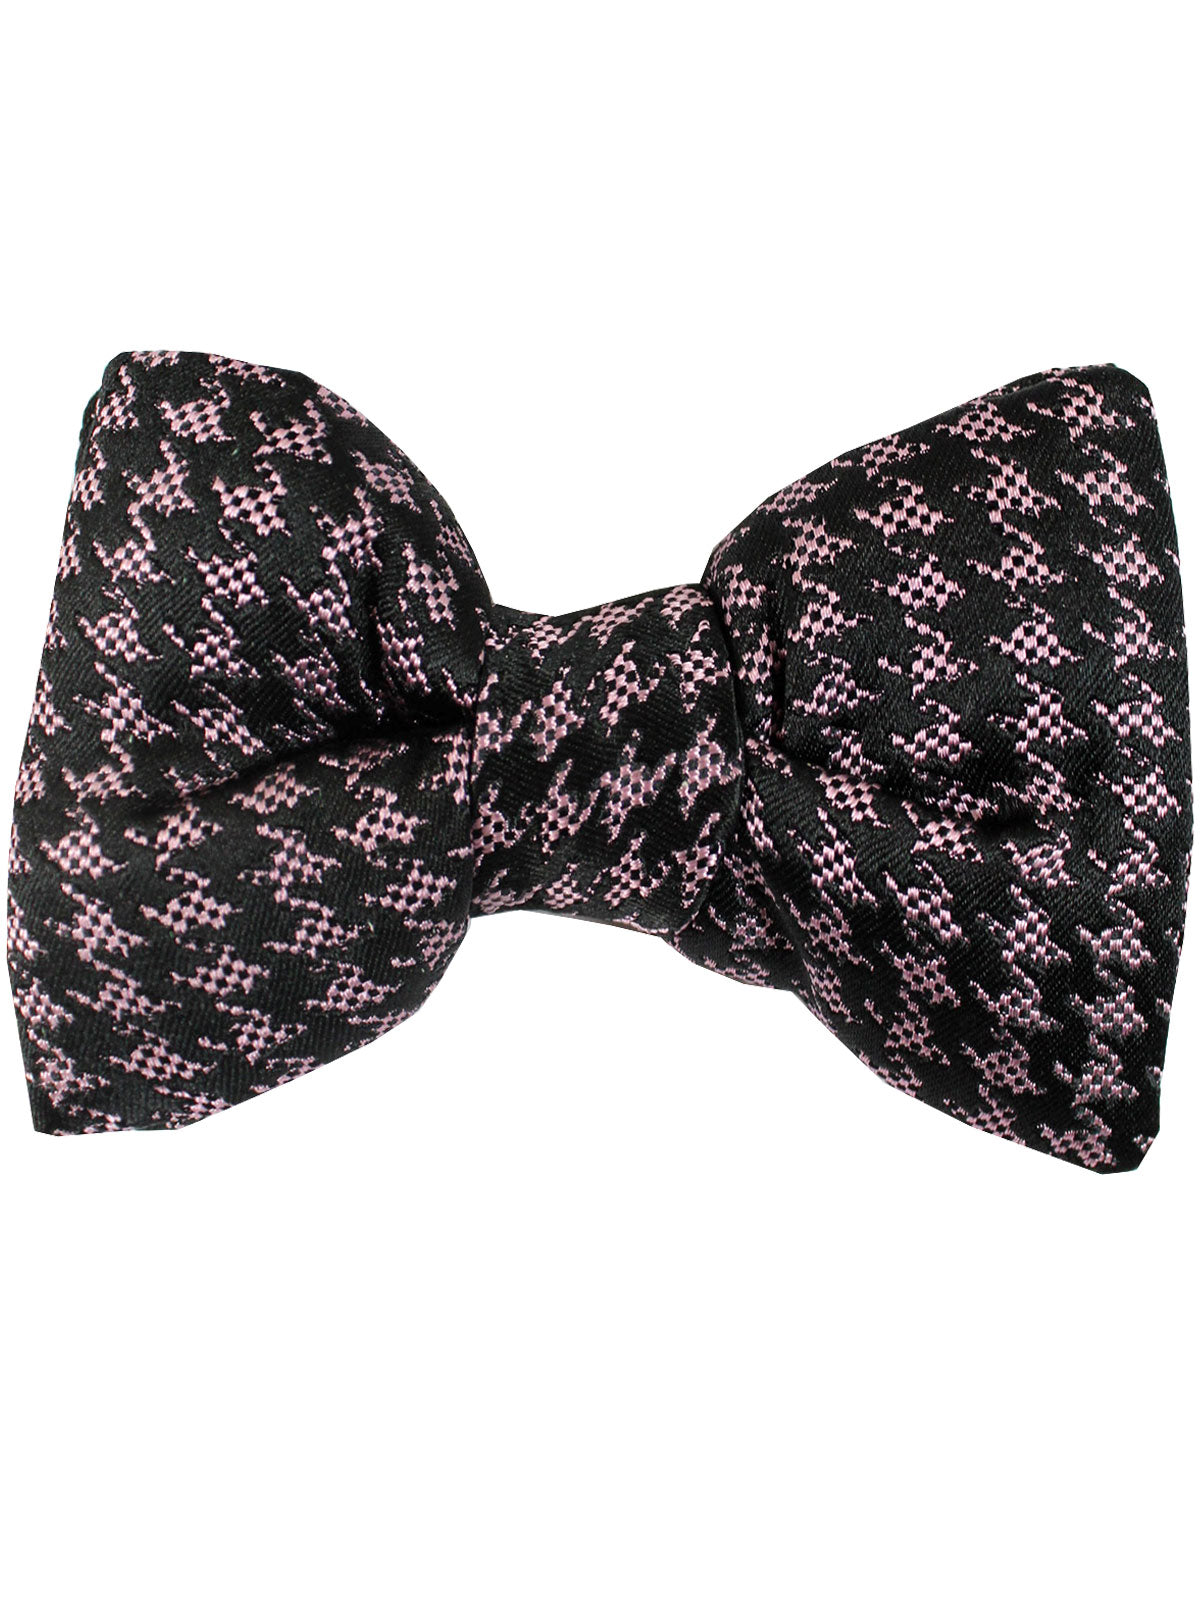 Tom Ford Bow Tie Black Dust Pink Houndstooth - Tie Deals